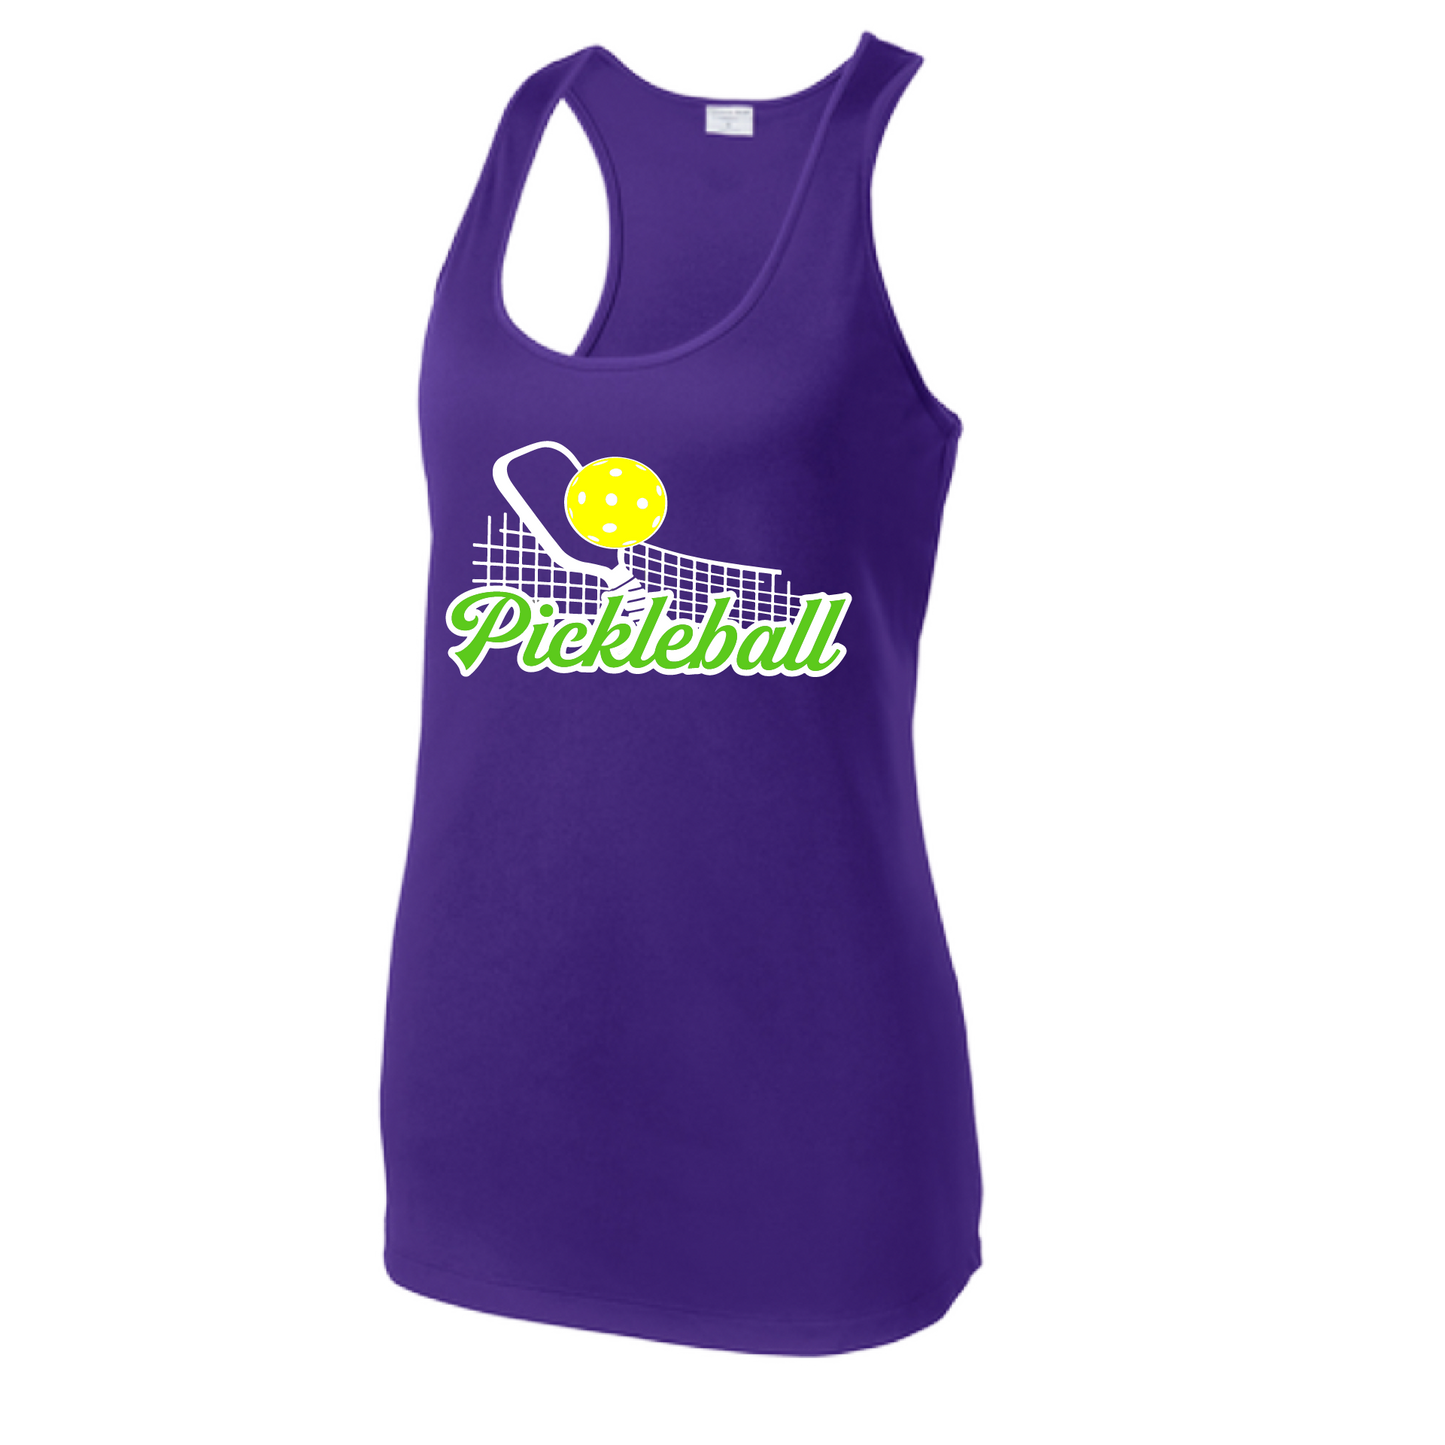 Pickleball Design: Pickleball and Net  Women's Style: Racerback Tank  Turn up the volume in this Women's shirt with its perfect mix of softness and attitude. Material is ultra-comfortable with moisture wicking properties and tri-blend softness. PosiCharge technology locks in color. Highly breathable and lightweight.